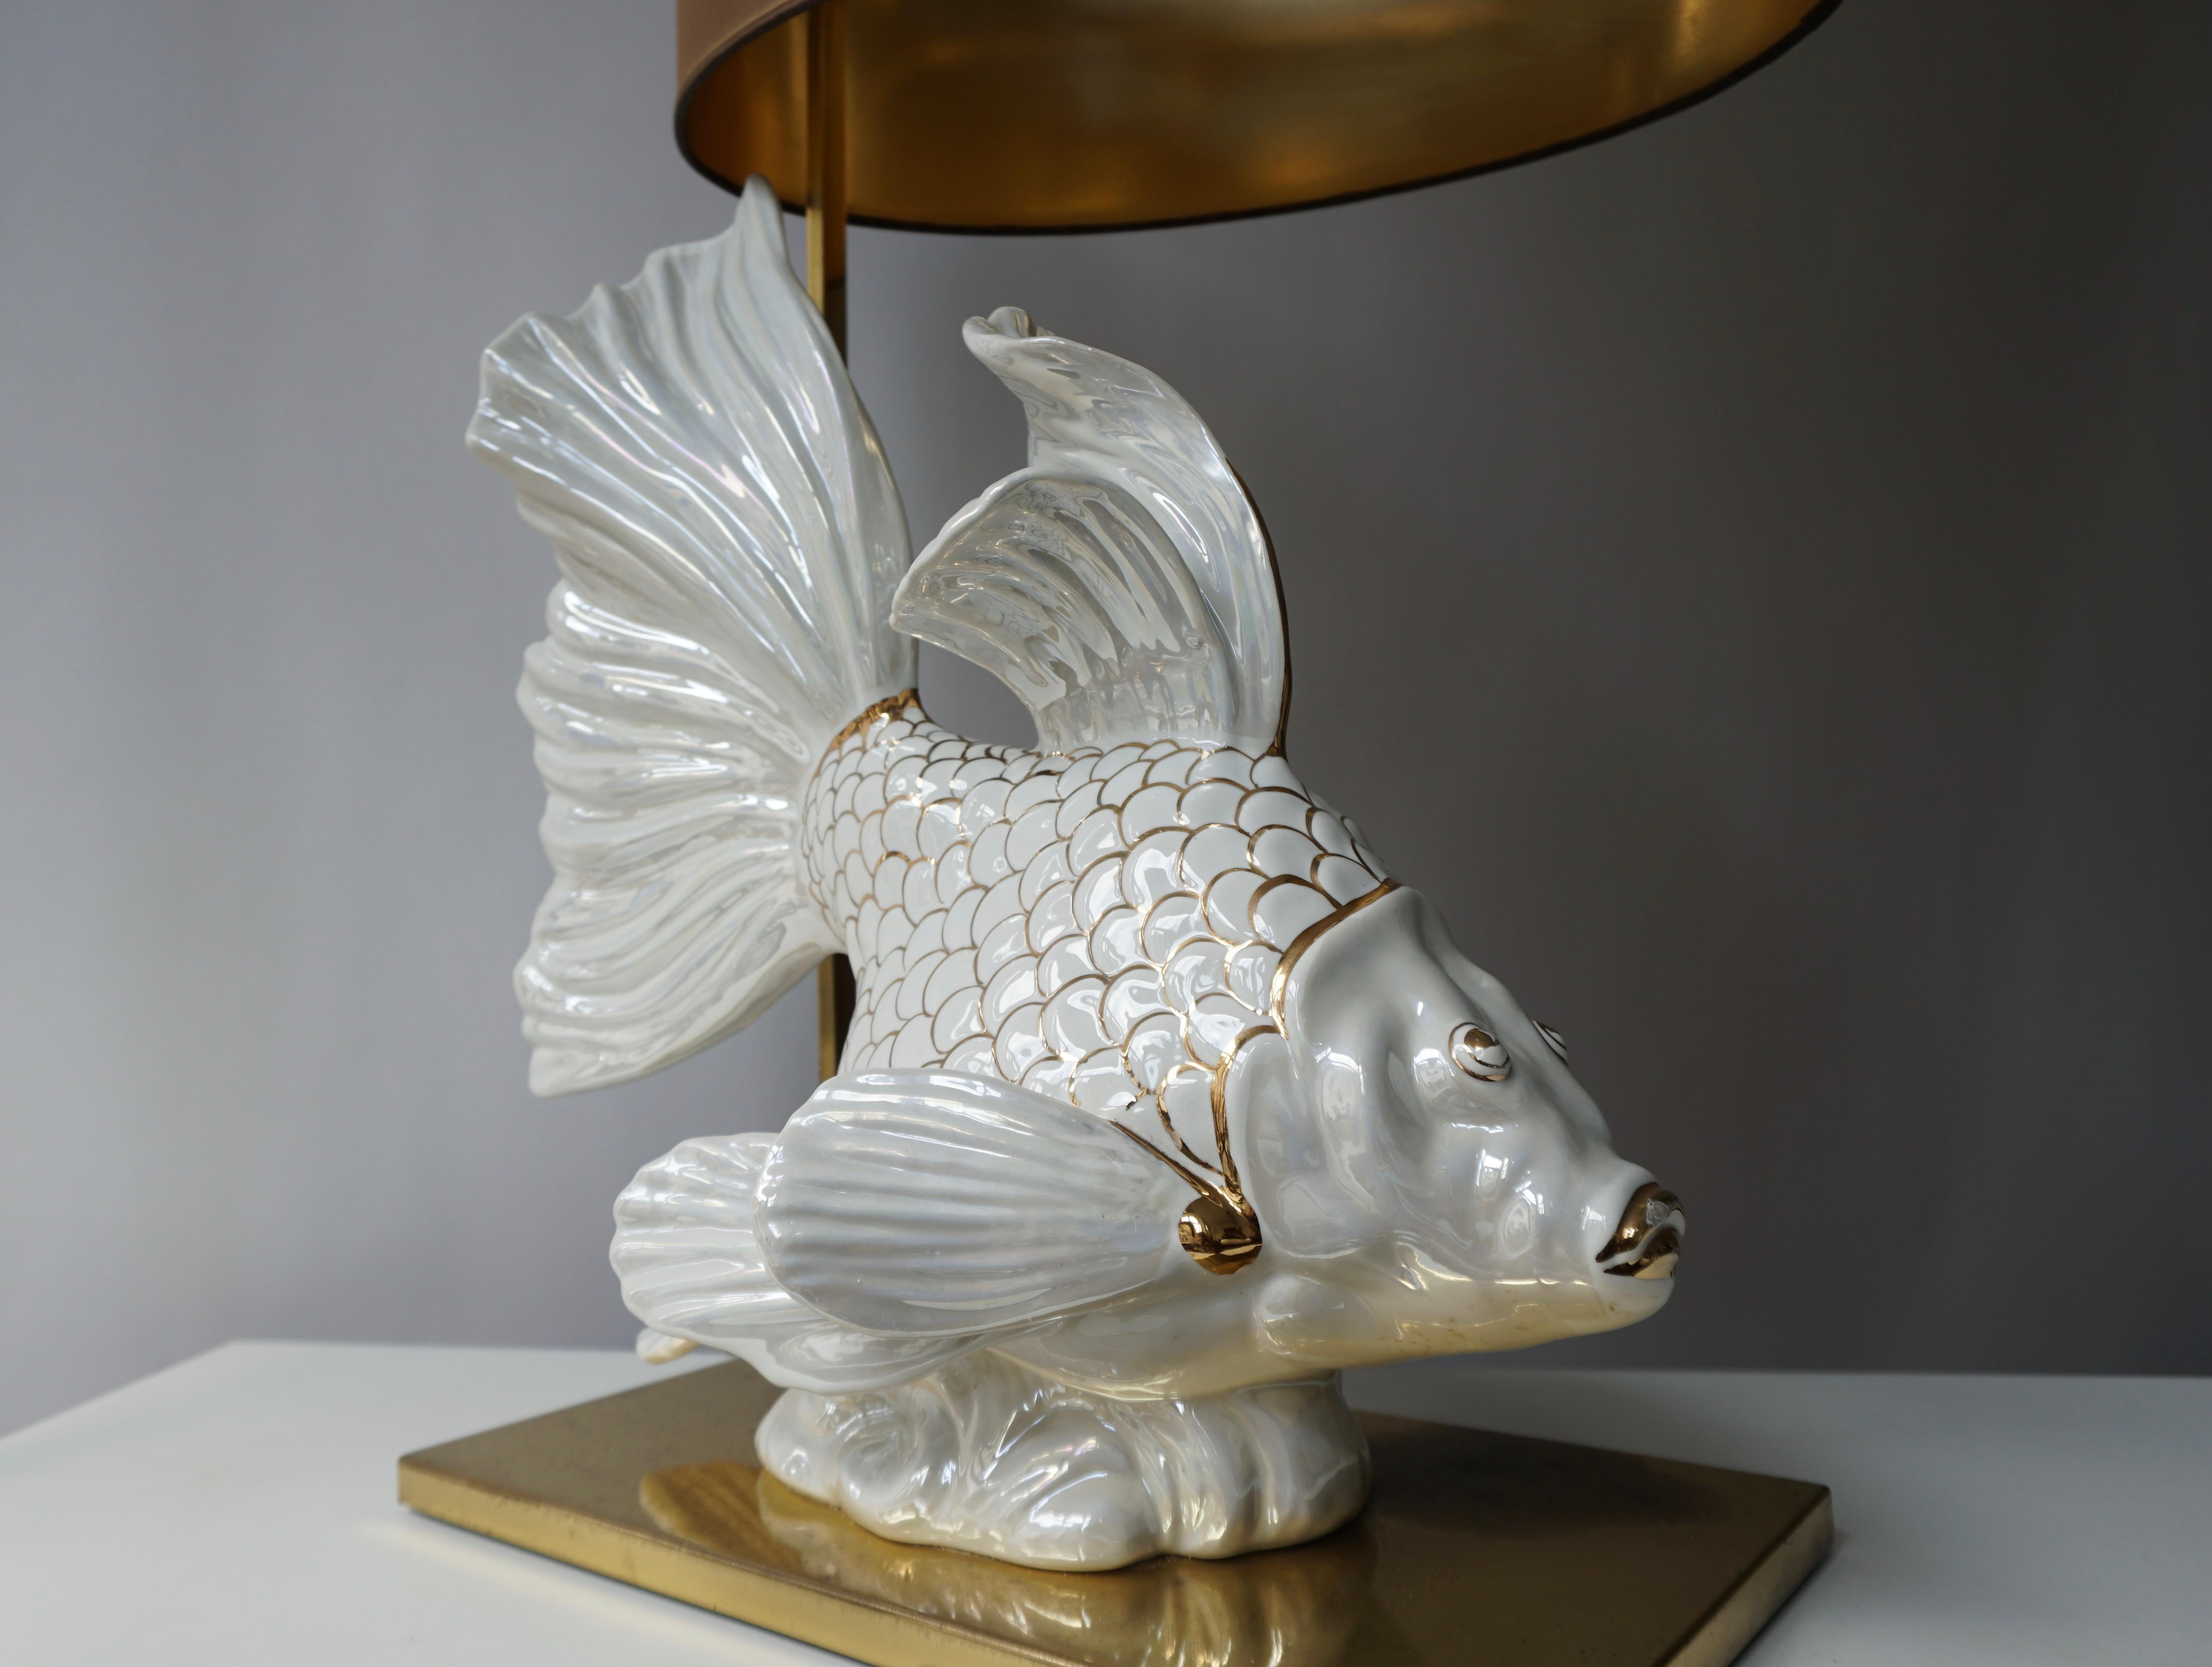 Gilt Italian Midcentury Big Ceramic Fish Lamp with Brass Details, 1970s For Sale